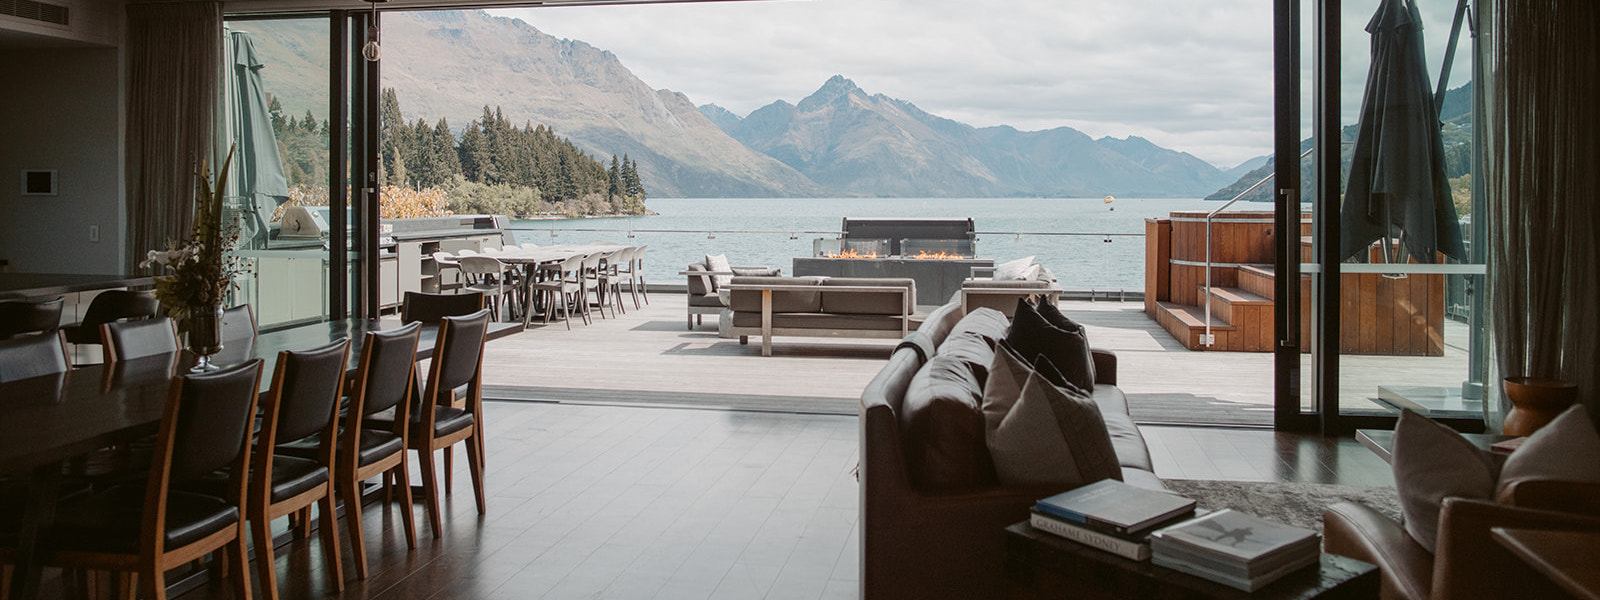 Eichardt's Private Hotel Queenstown - Accommodation - The Penthouse - Gallery 3